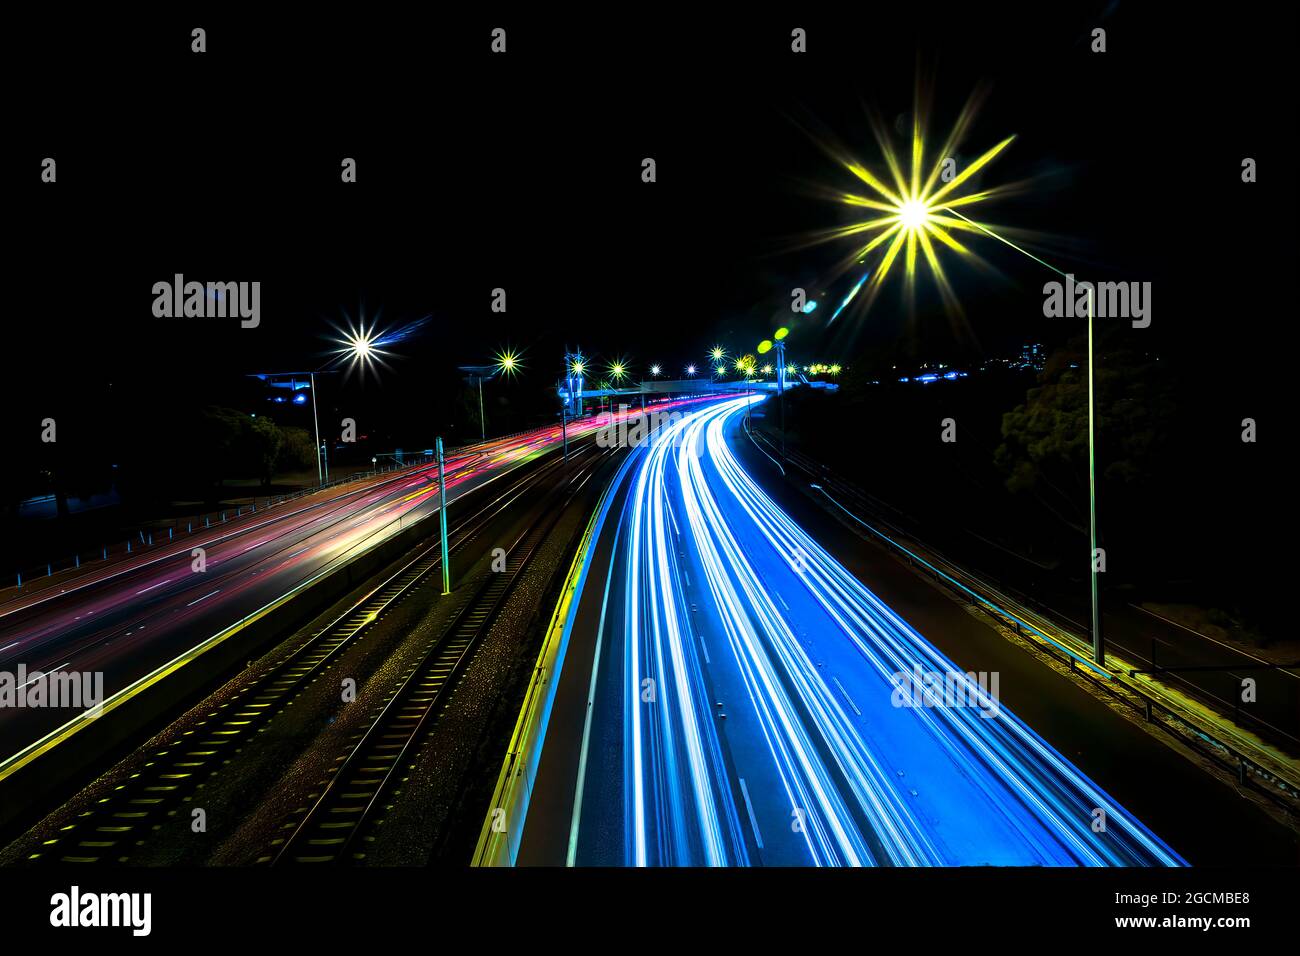 Light trails on a motorway either side of railway tracks at night, Perth, Western Australia, Australia Stock Photo